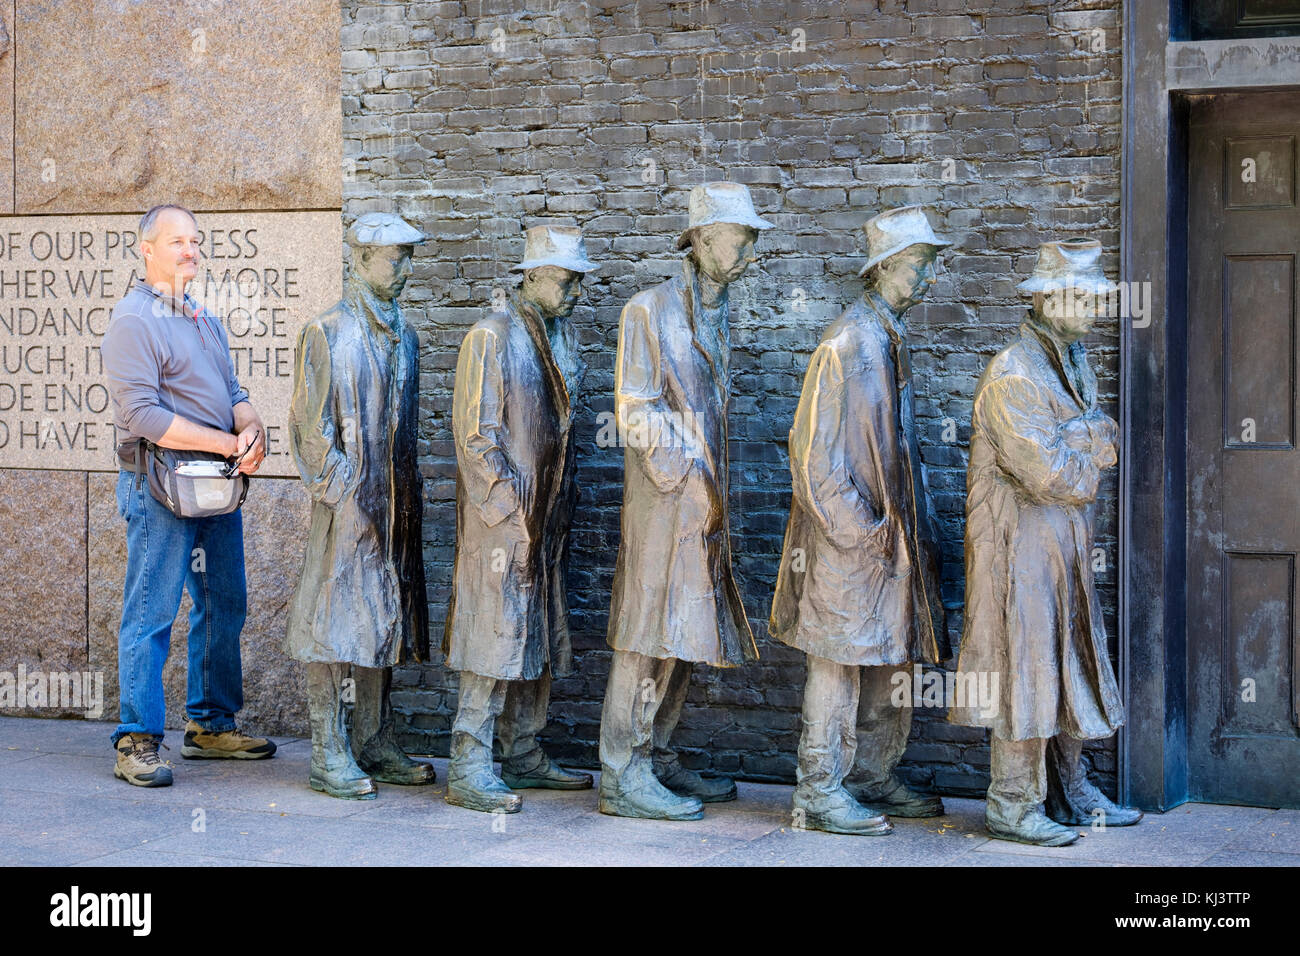 A male tourist posing for a photo at Bread Line, sculpture by George Segal, Room Two of Franklin Delano Roosevelt Memorial, Washington, D.C., USA. Stock Photo